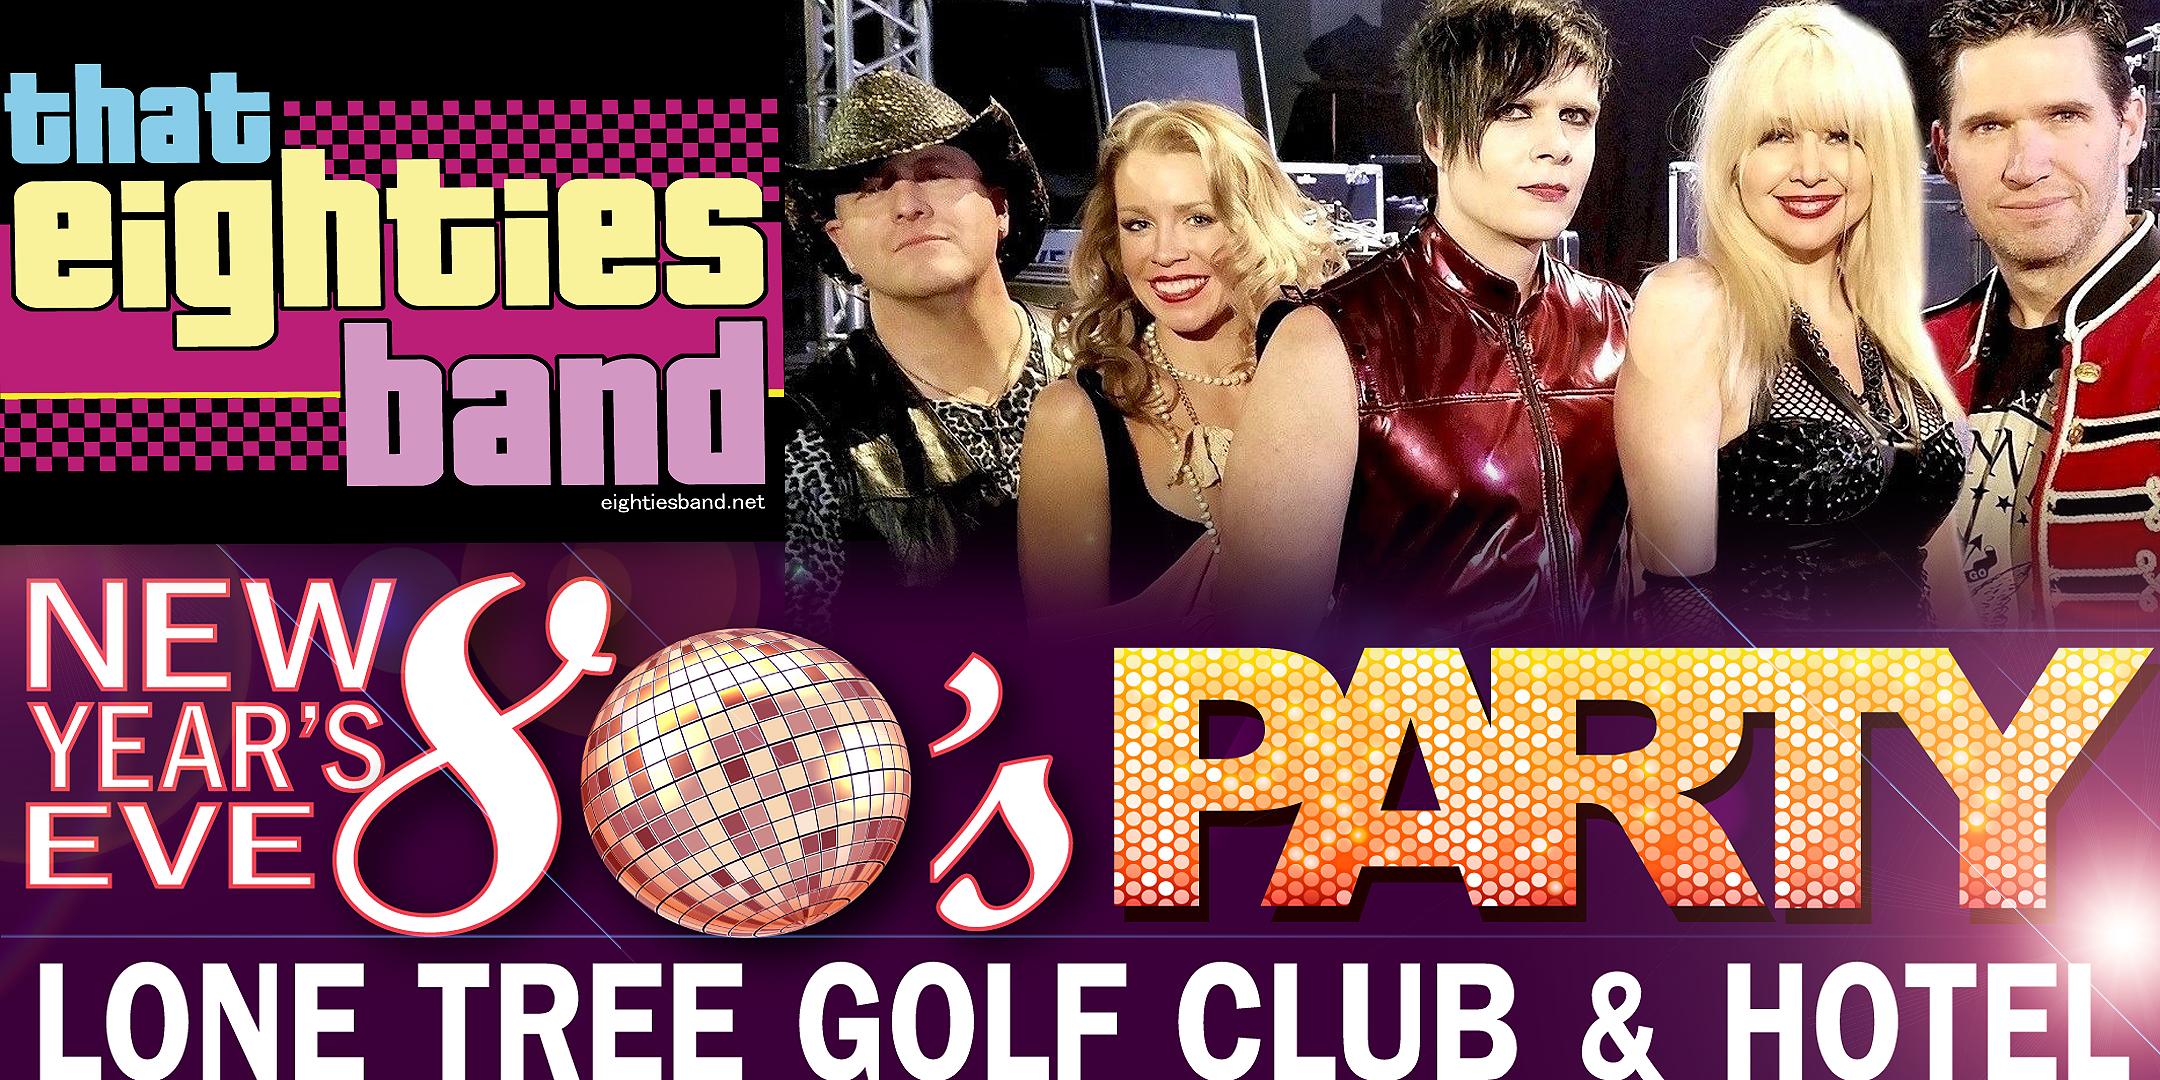 New Year's Eve 80's Party at Lone Tree Golf Club & Hotel